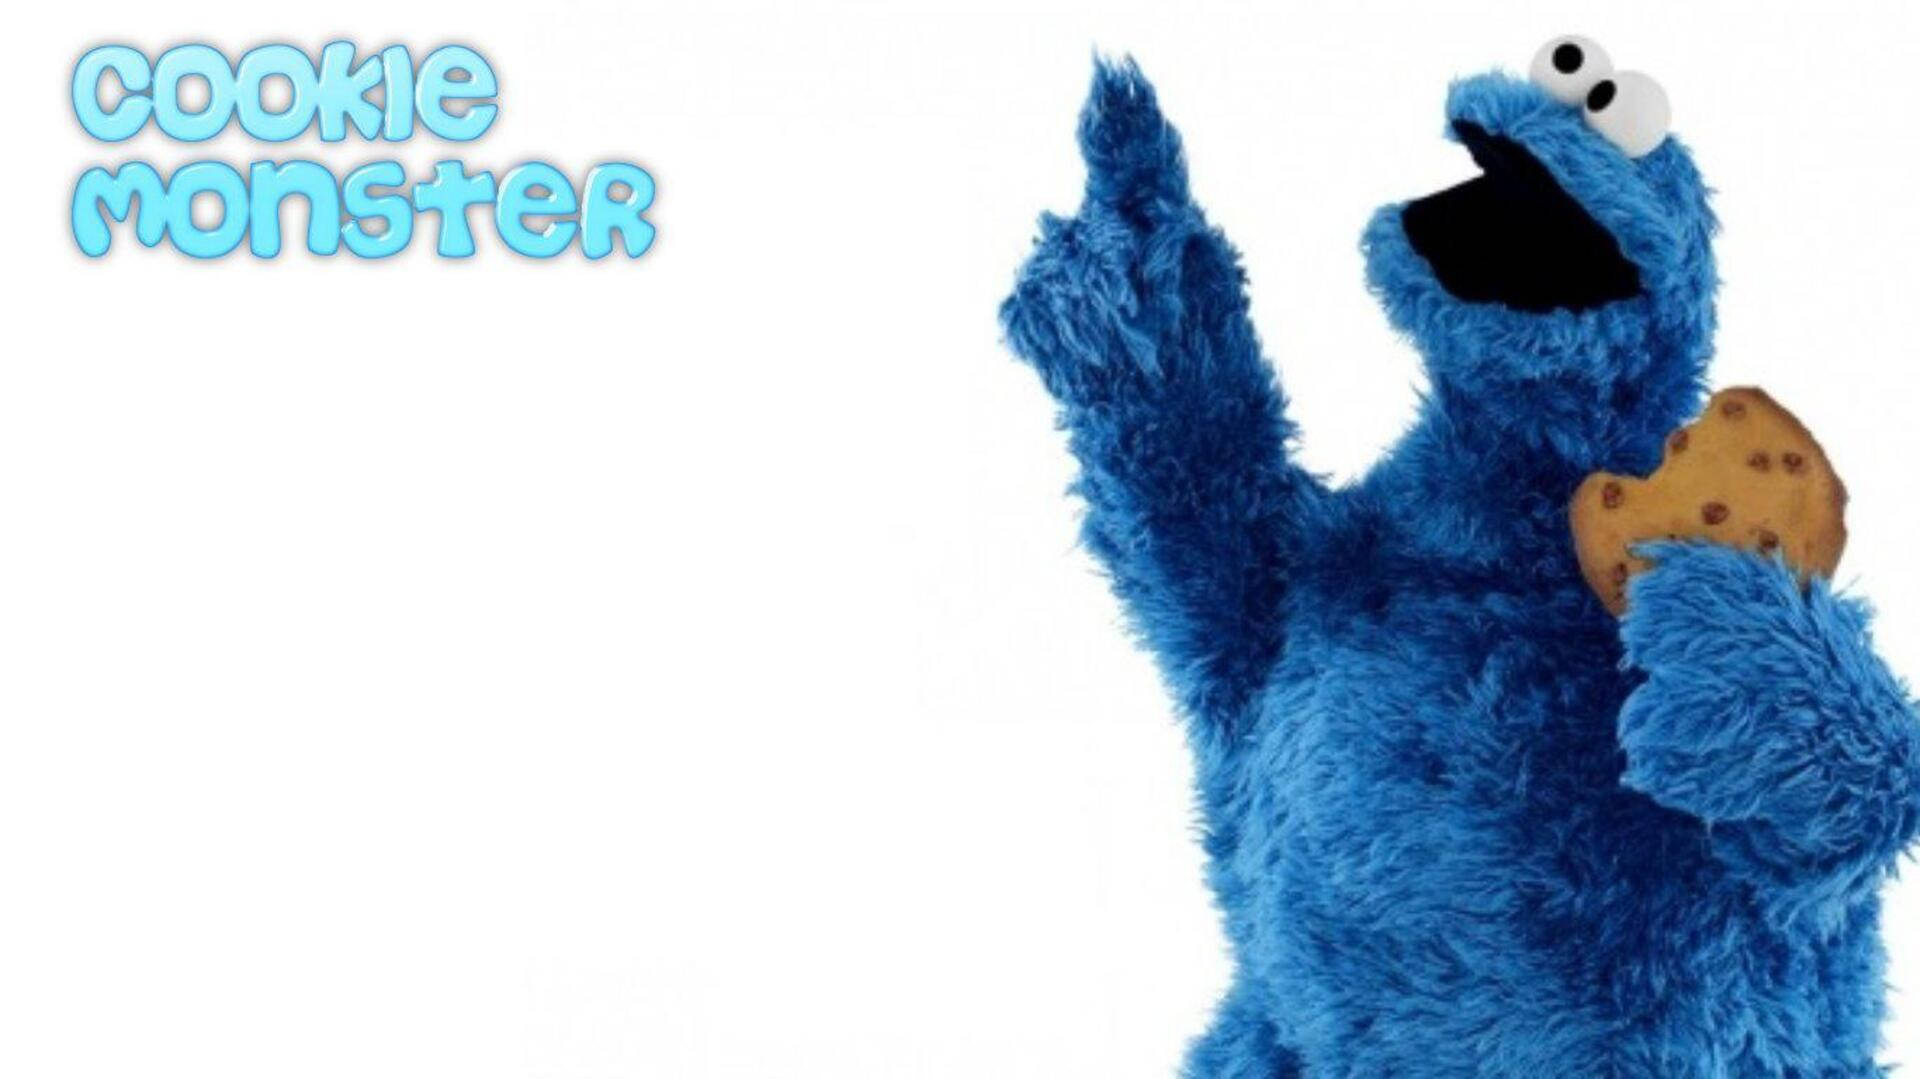 Funny Muppet Cookie Monster Wallpaper